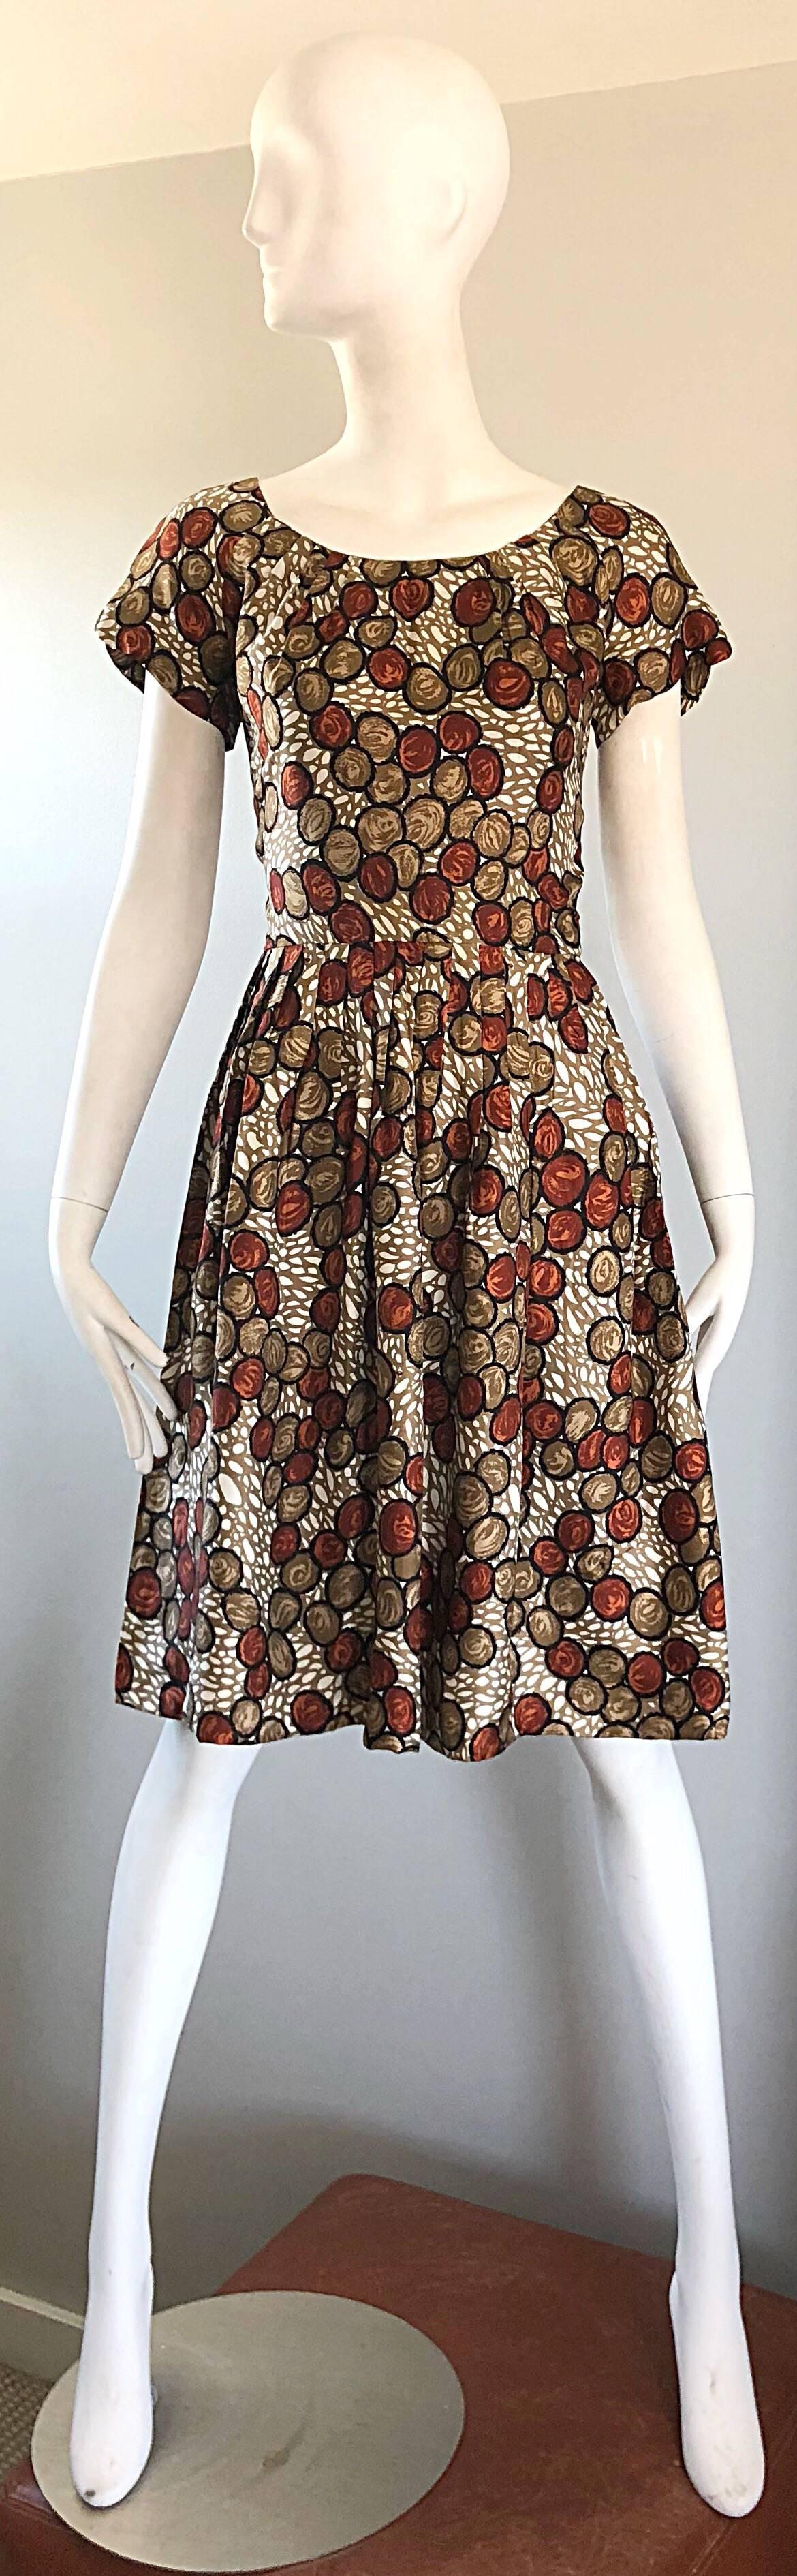 Gorgeous 1950s walnut novelty print fit and flare silk couture dress! Features a fun walnut print in rich rust brown, beige and ivory colors. Wonderful tailored fitted bodice with a forgiving and flattering full skirt. Full metal zipper up the back